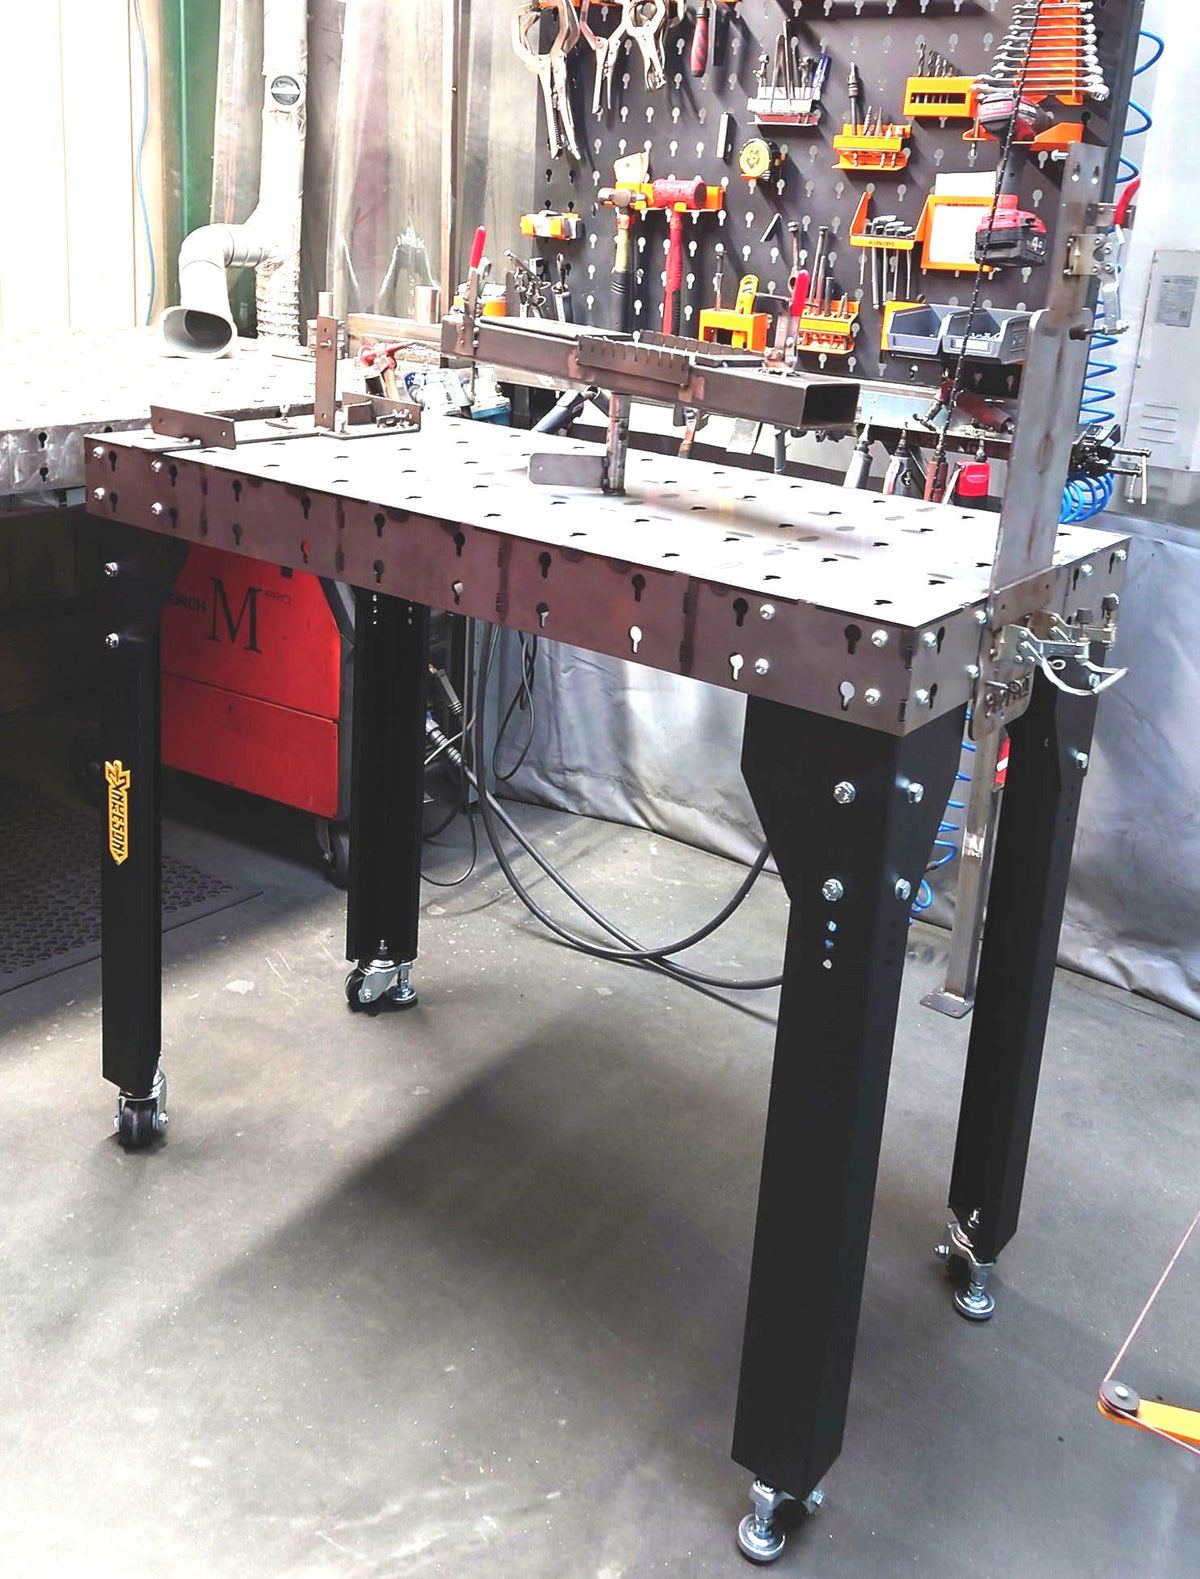 Modular Welding Table with Jigs installed on top, placed in a factory setting